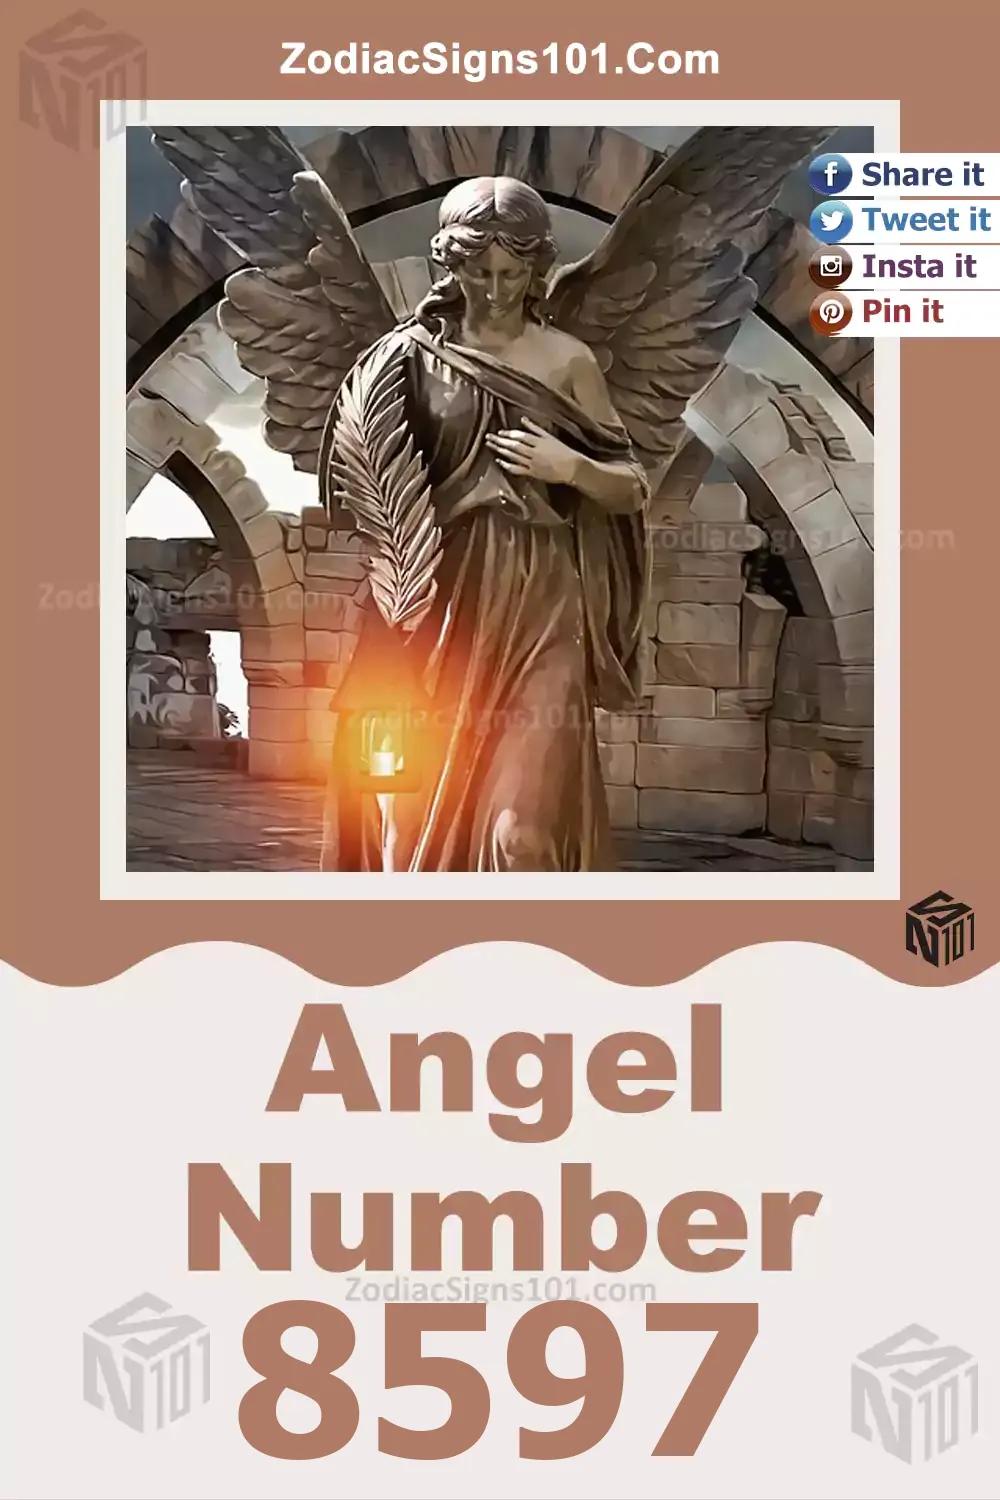 8597 Angel Number Meaning